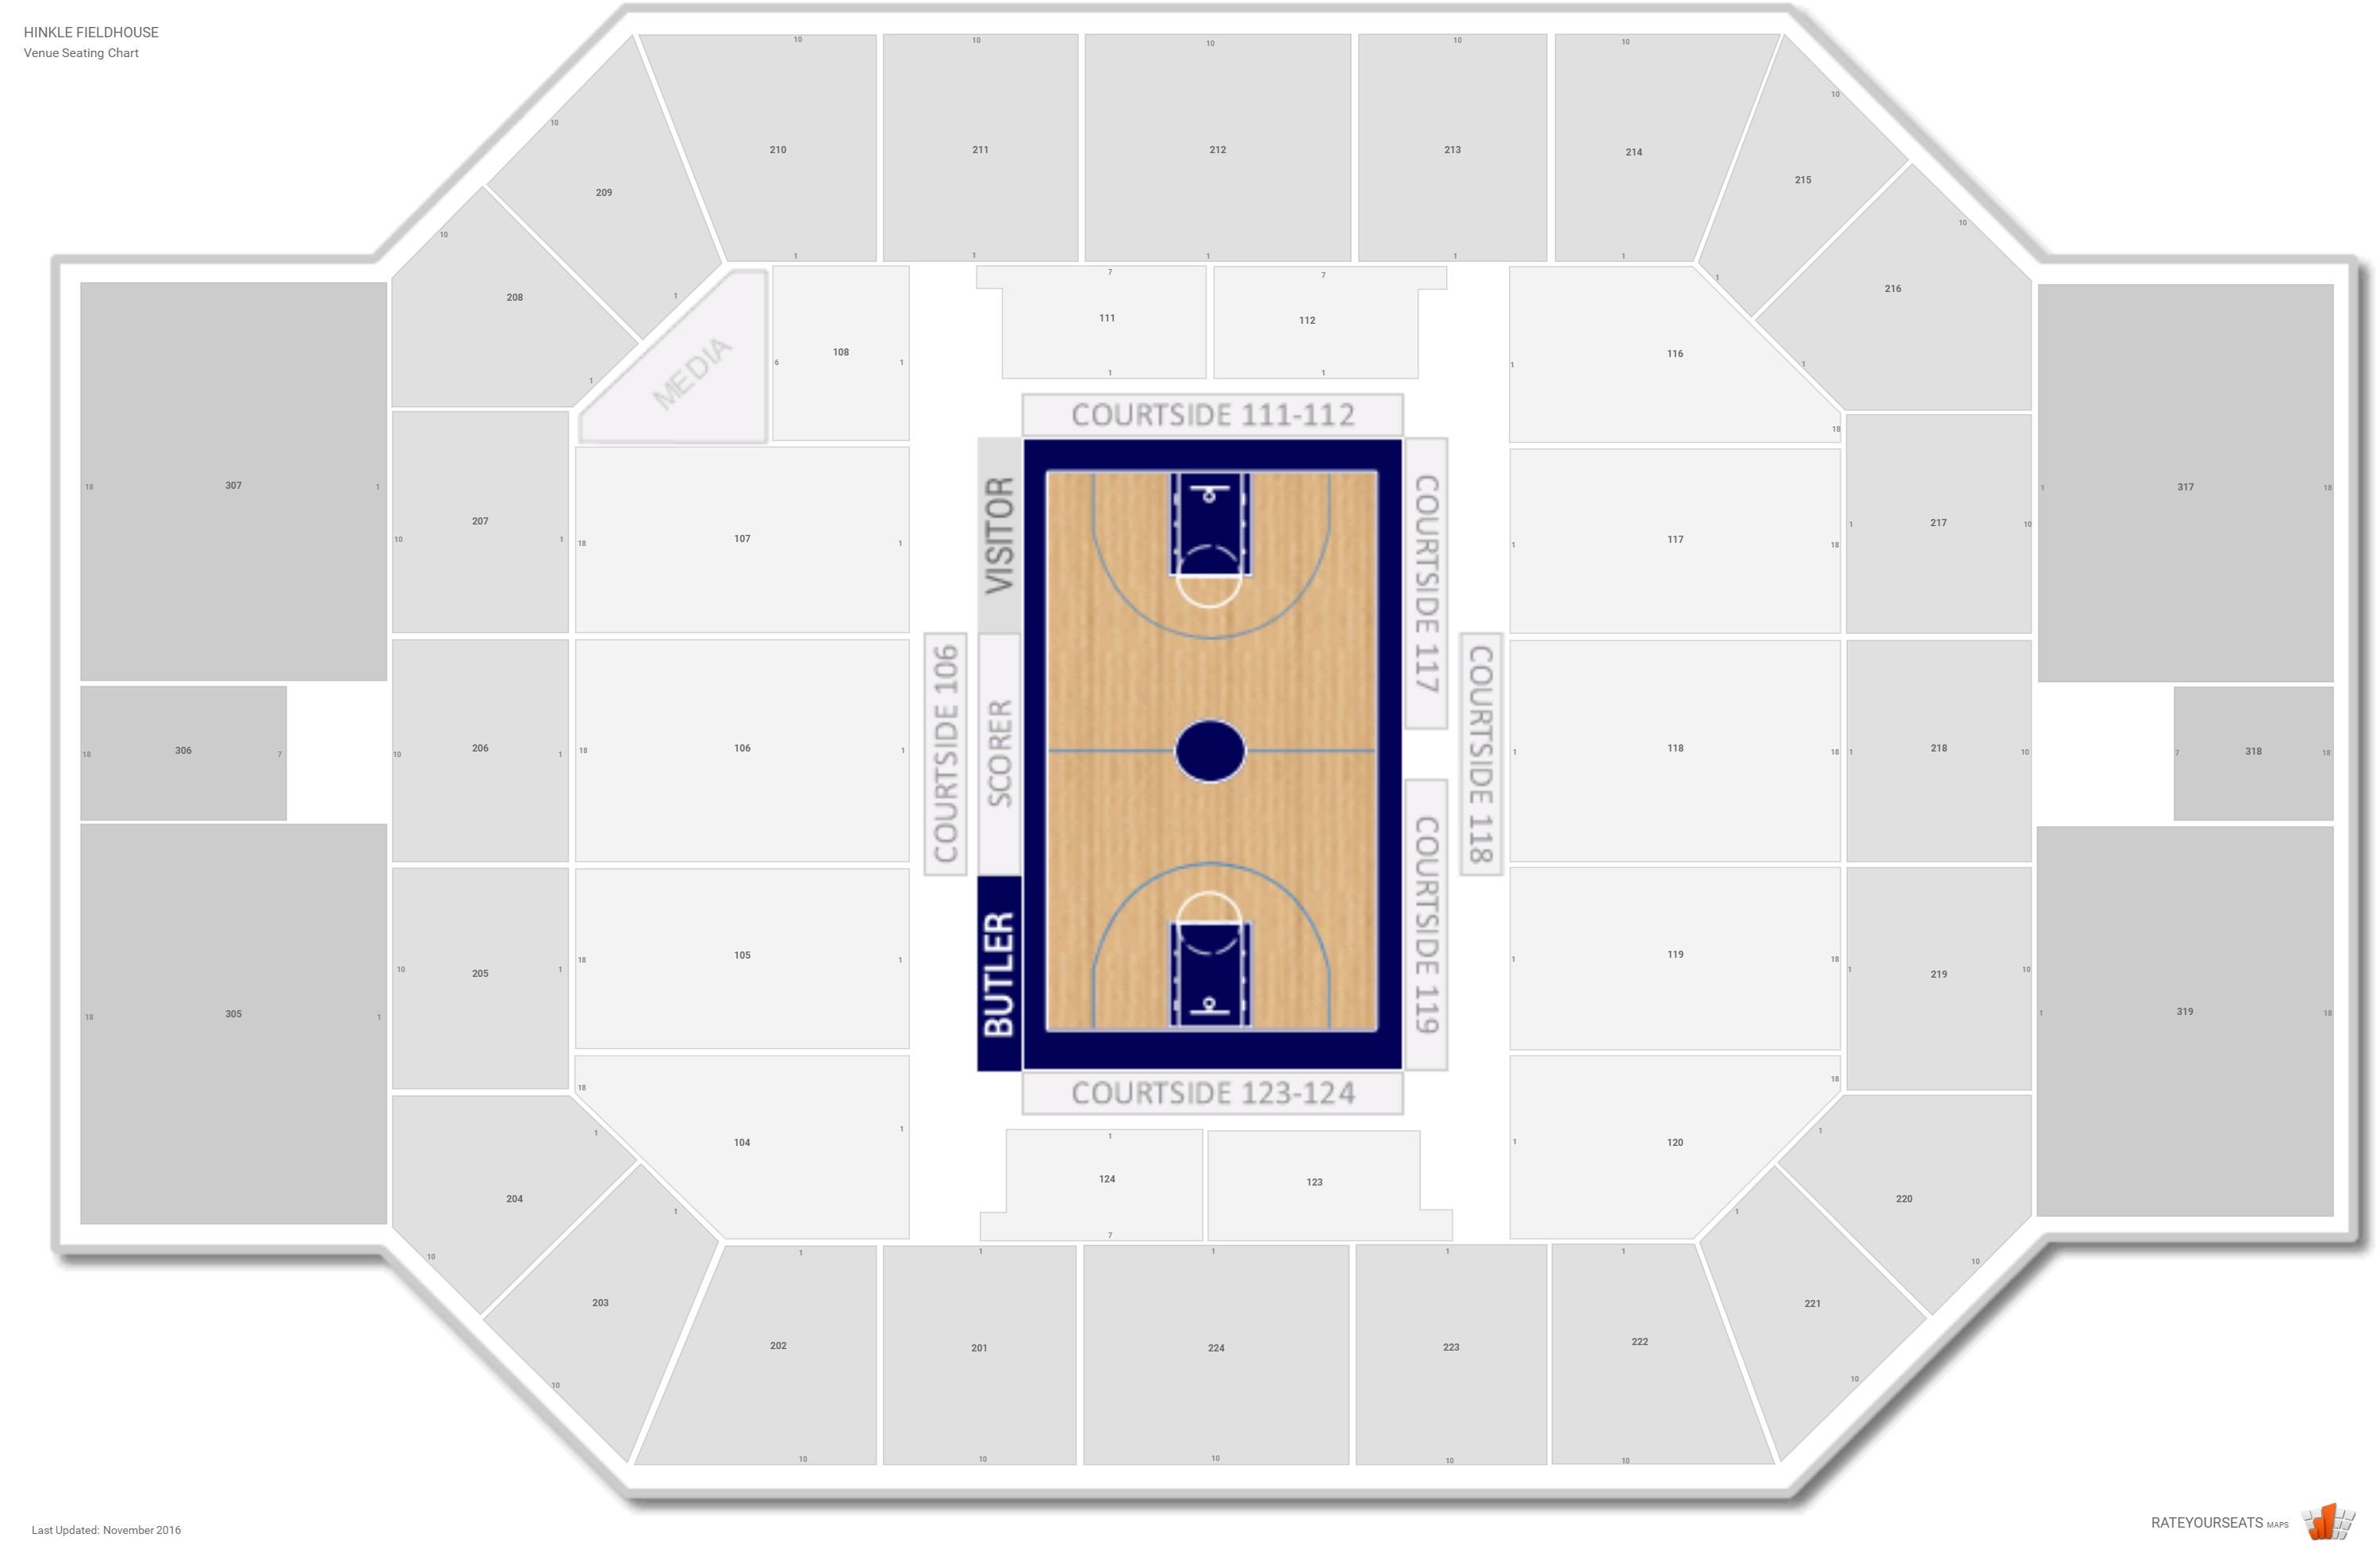 Hinkle Fieldhouse Seating Chart With Seat Numbers